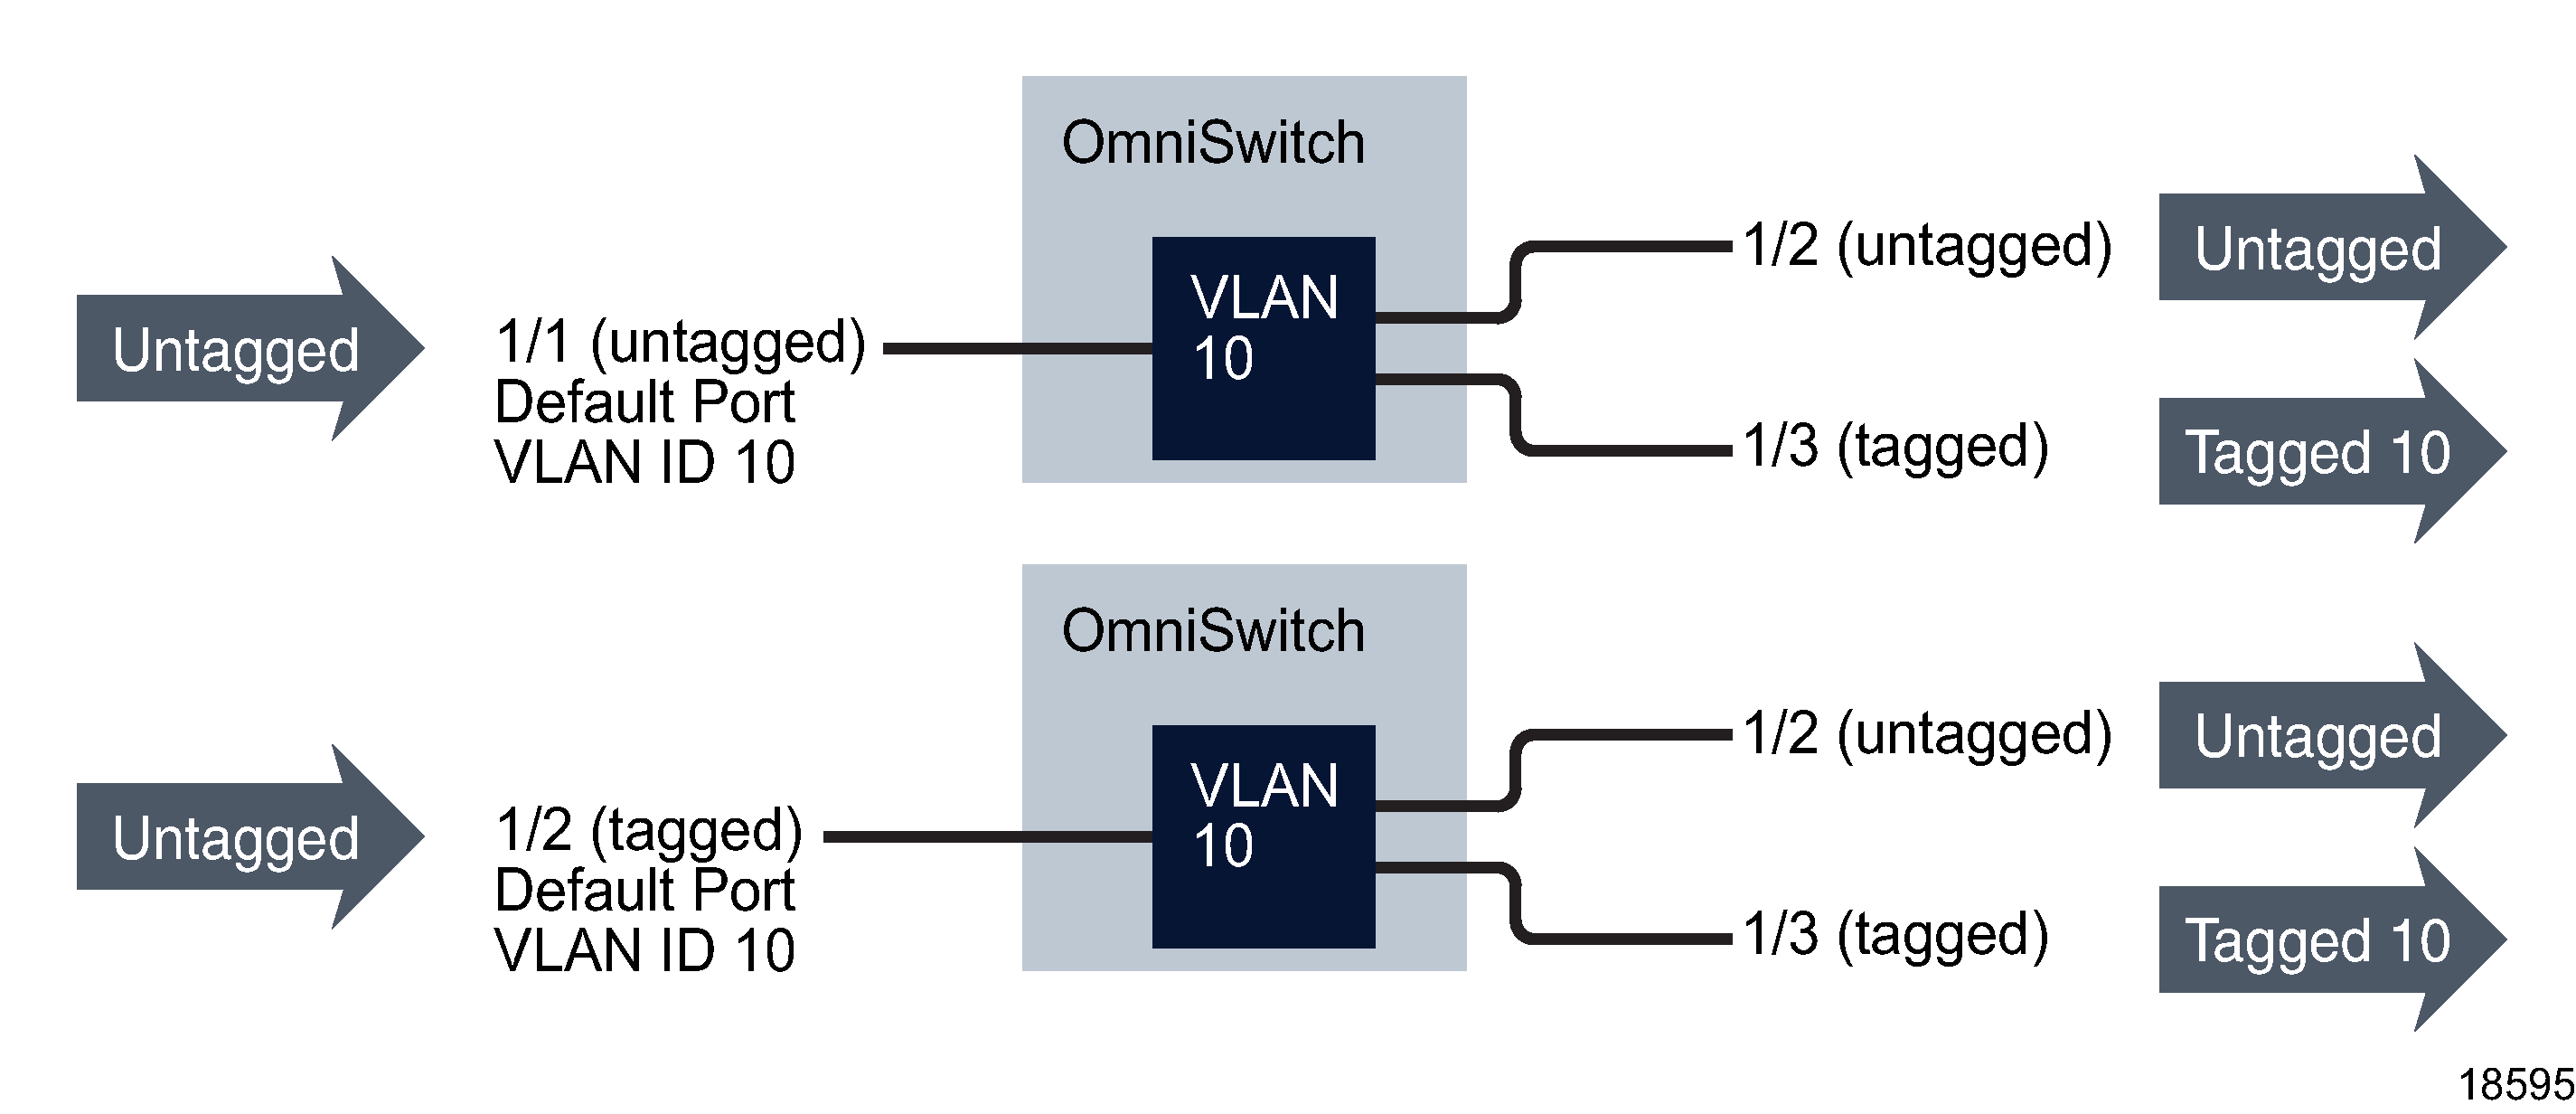 Untagged traffic and VLANs